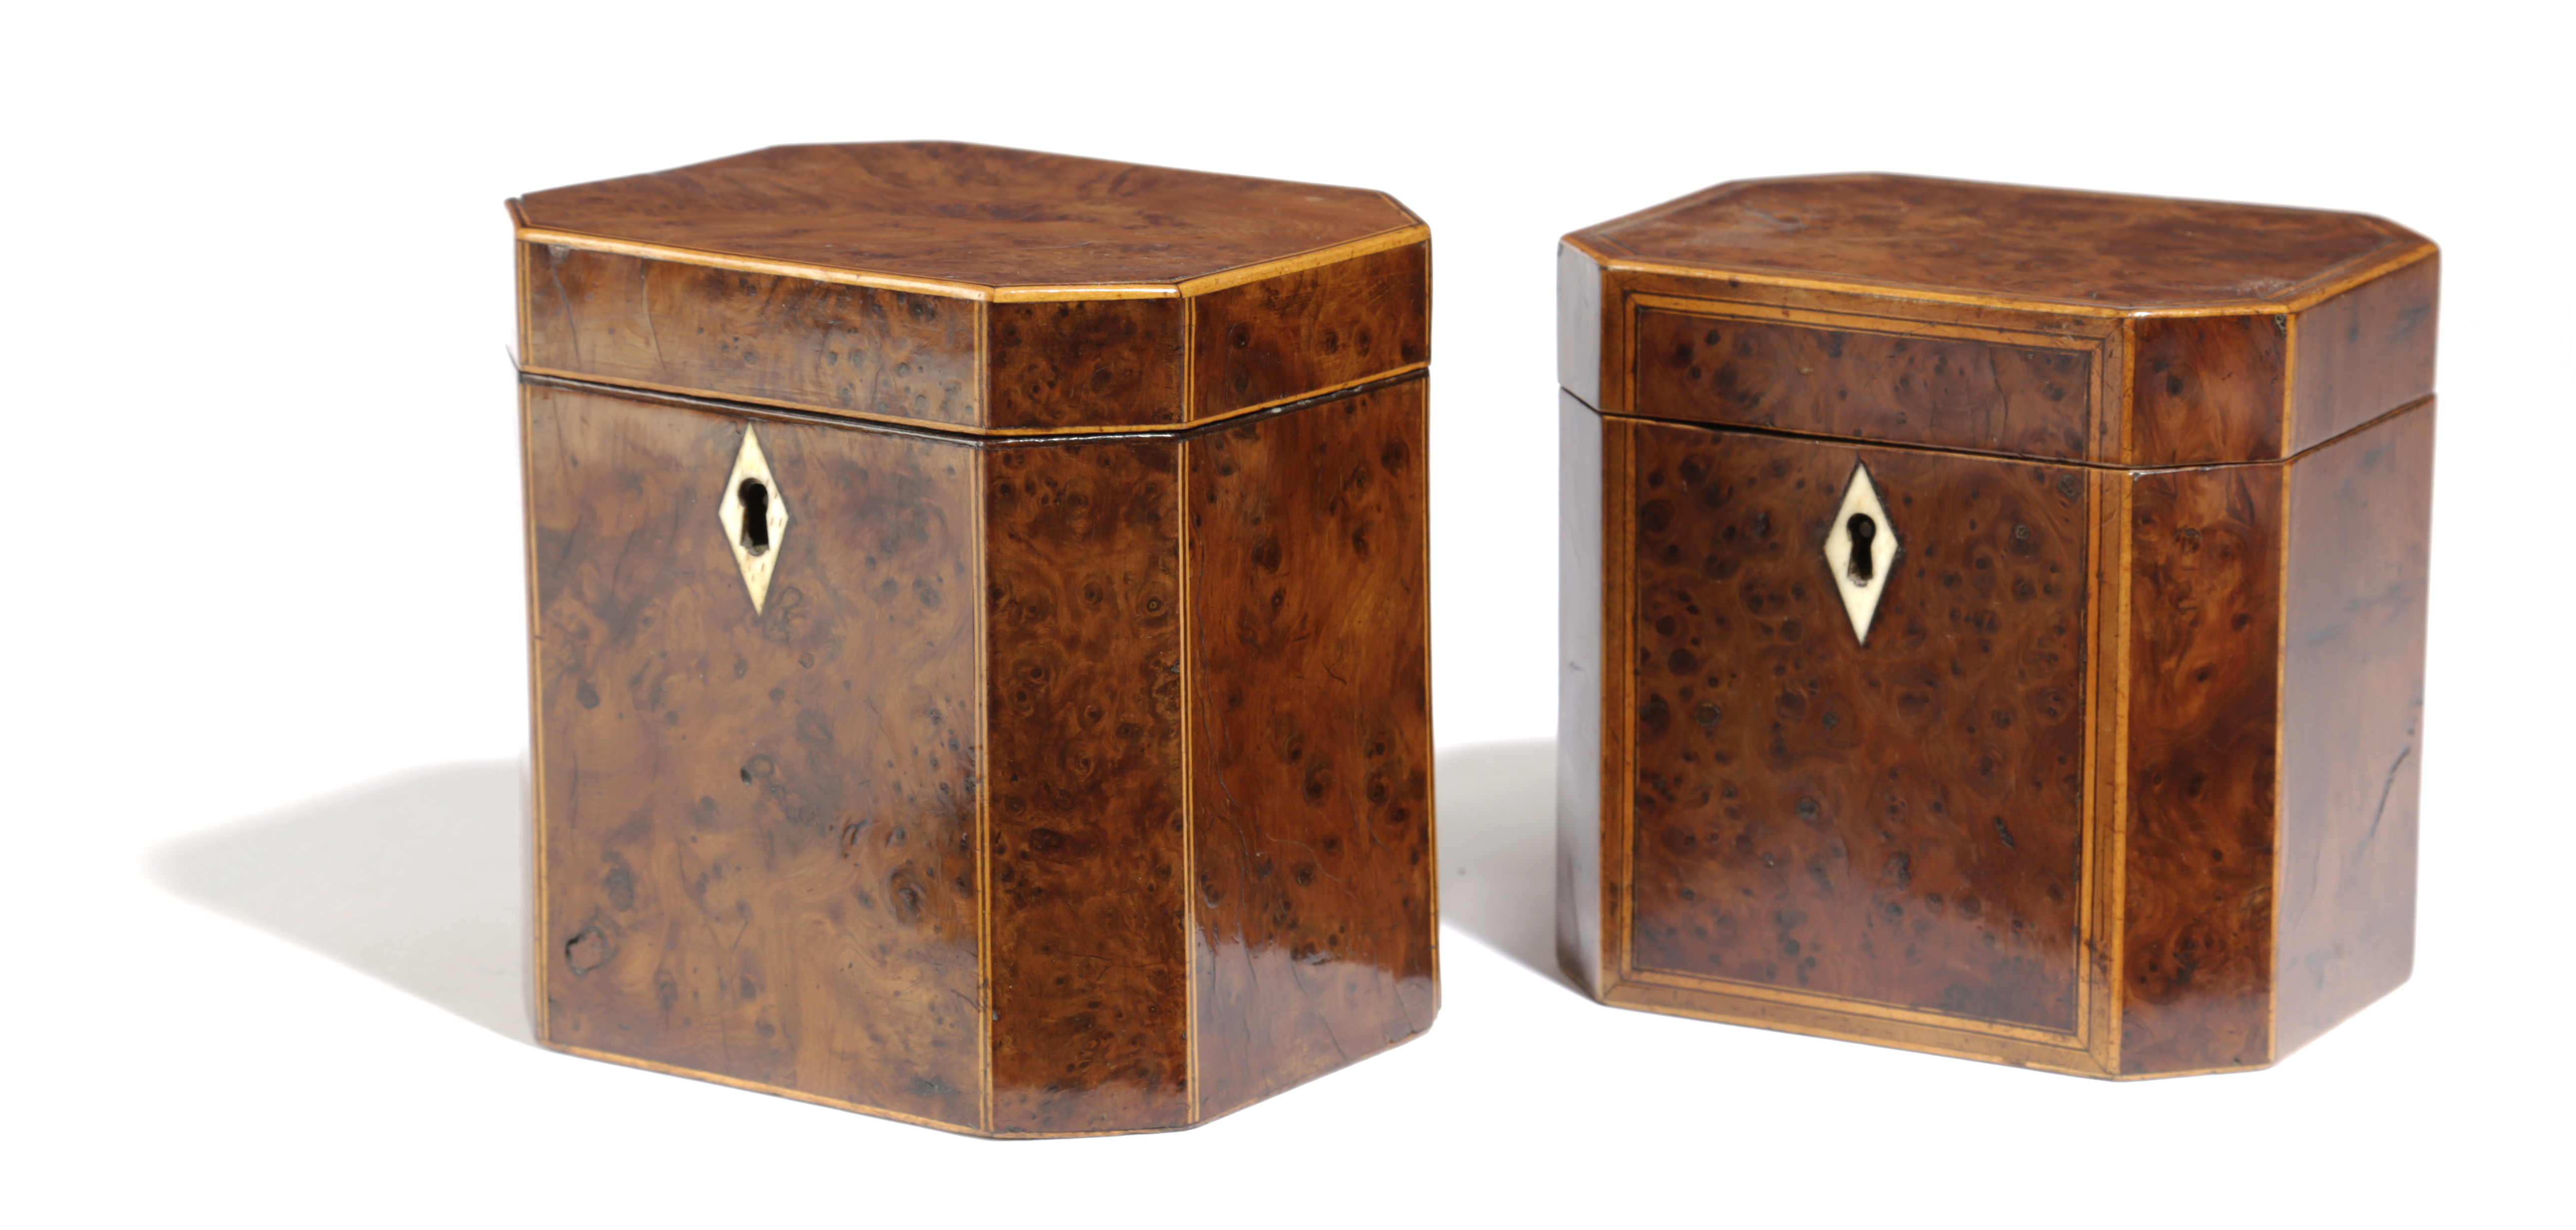 A GEORGE III BURR WALNUT TEA CADDY LATE 18TH CENTURY of canted rectangular form with a bone